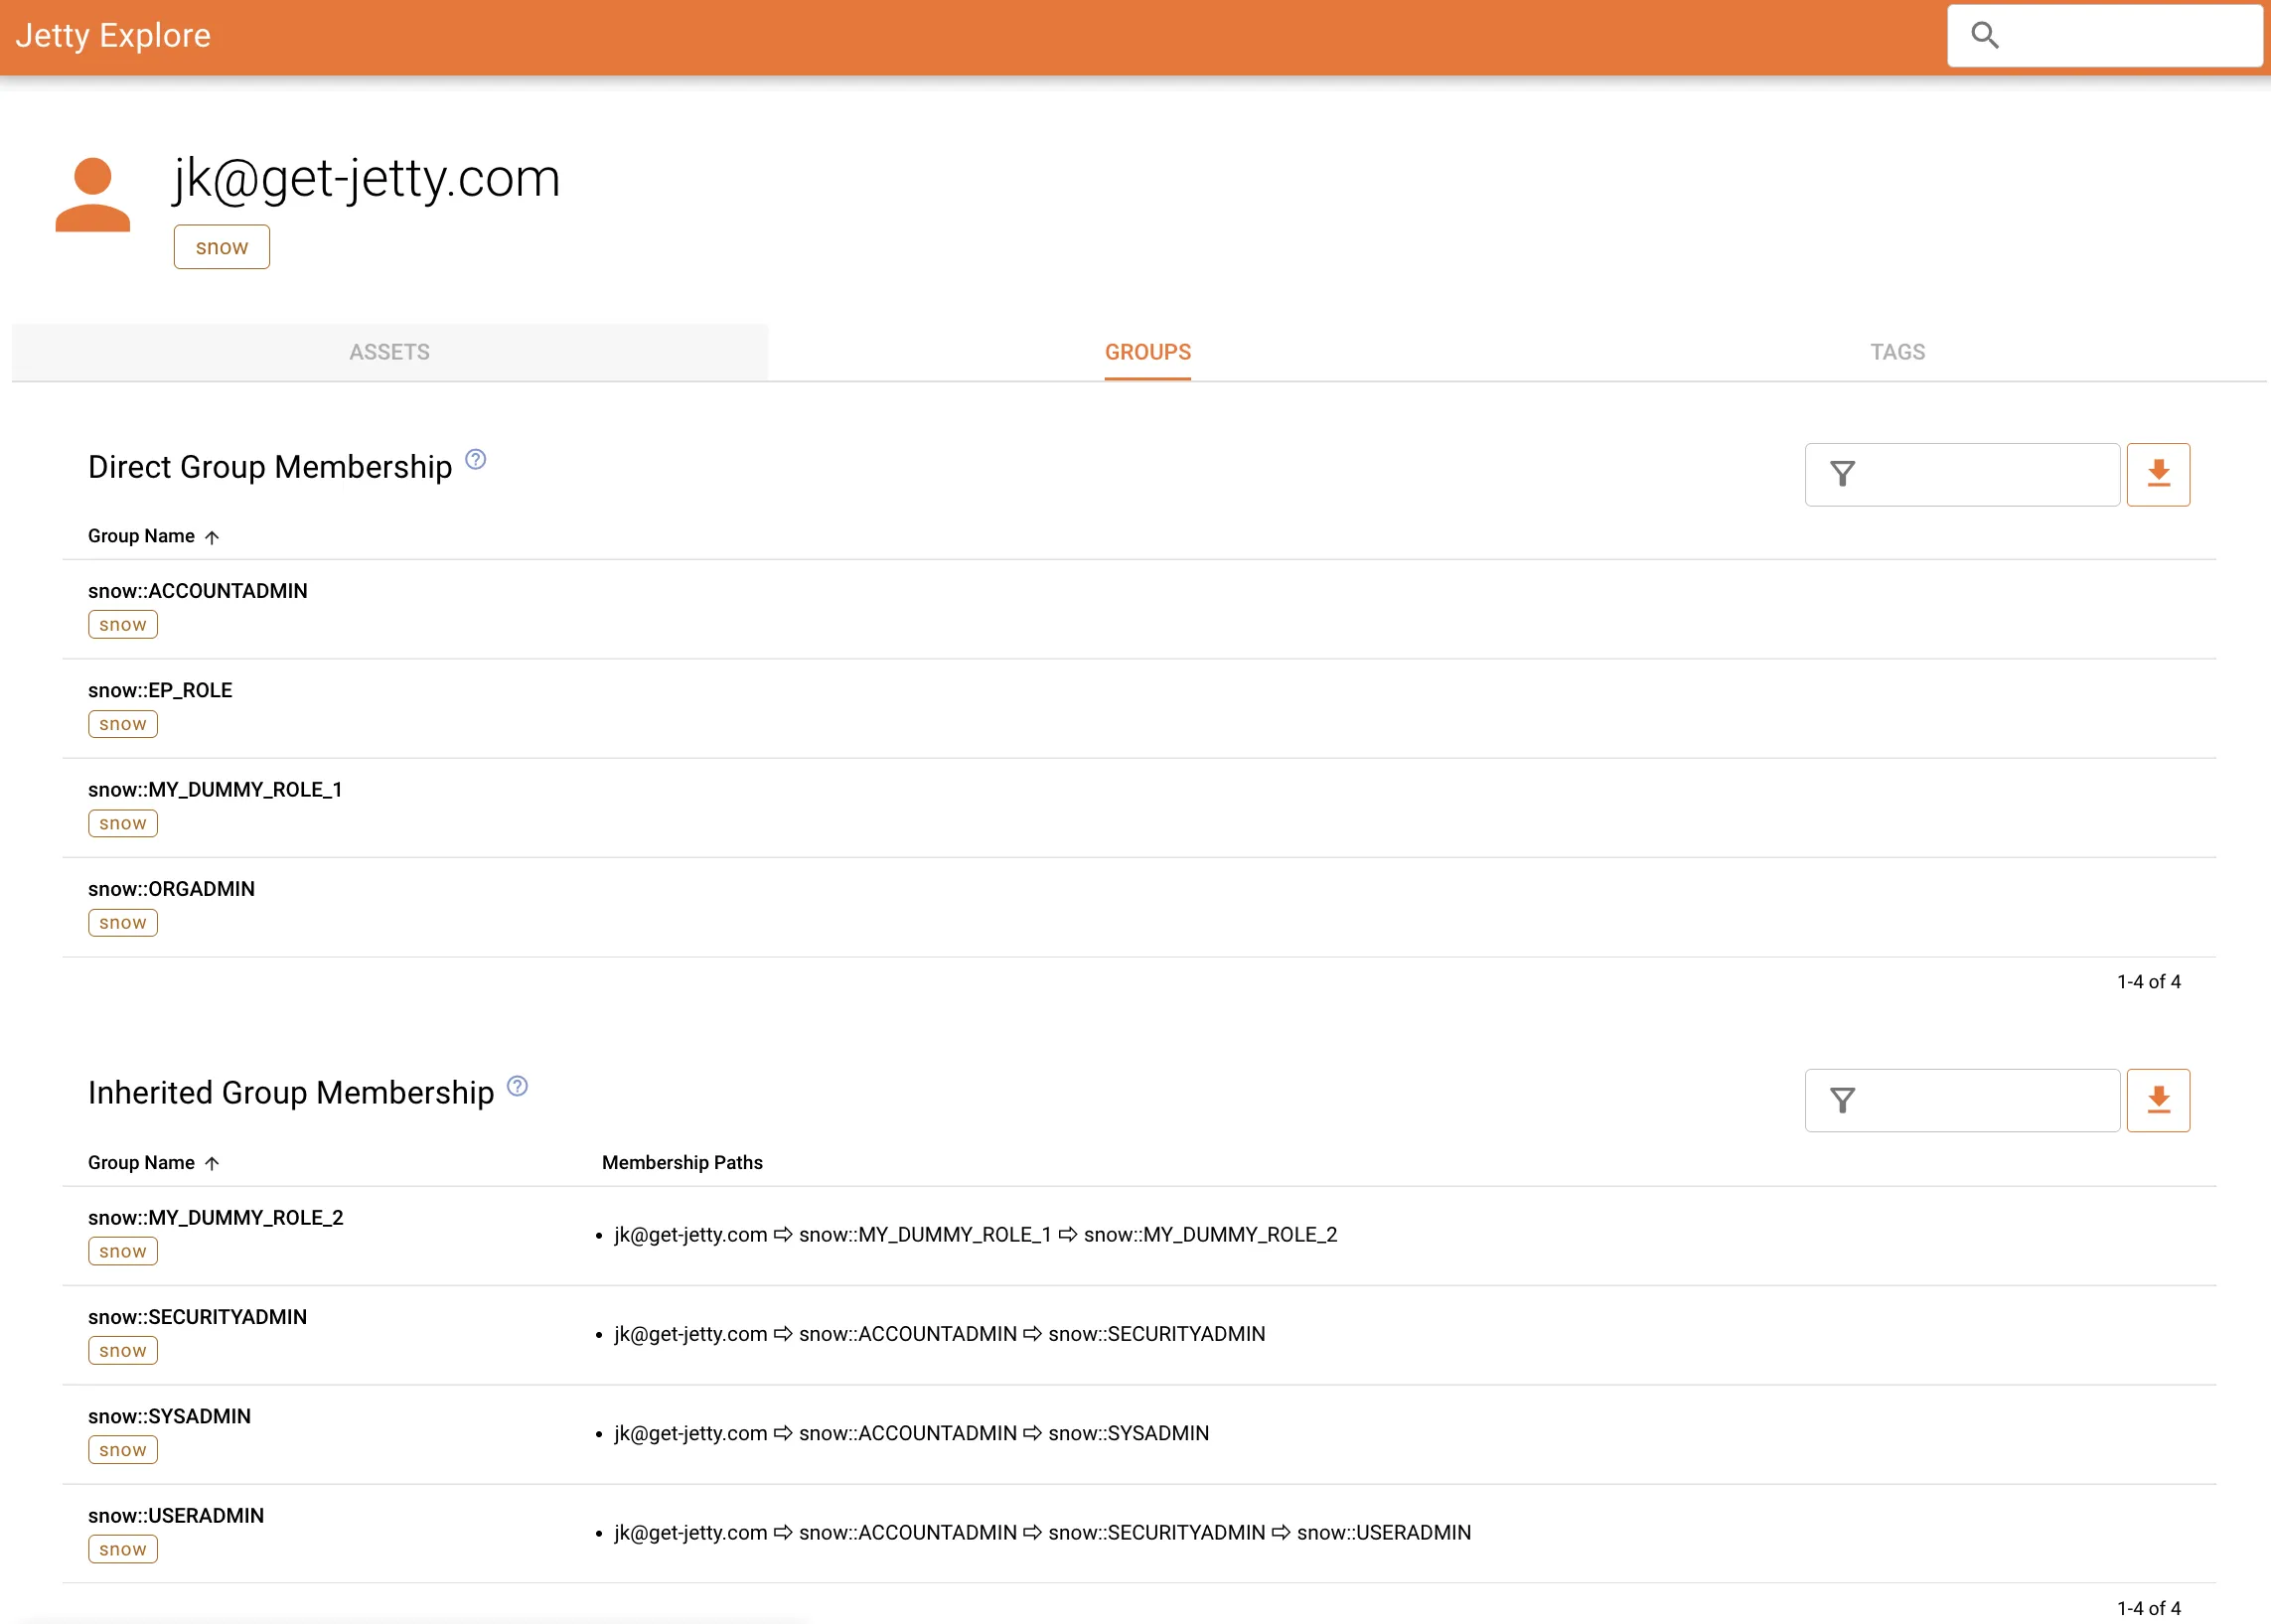 a screen capture of a user view in Jetty, viewing direct and inherited group membership